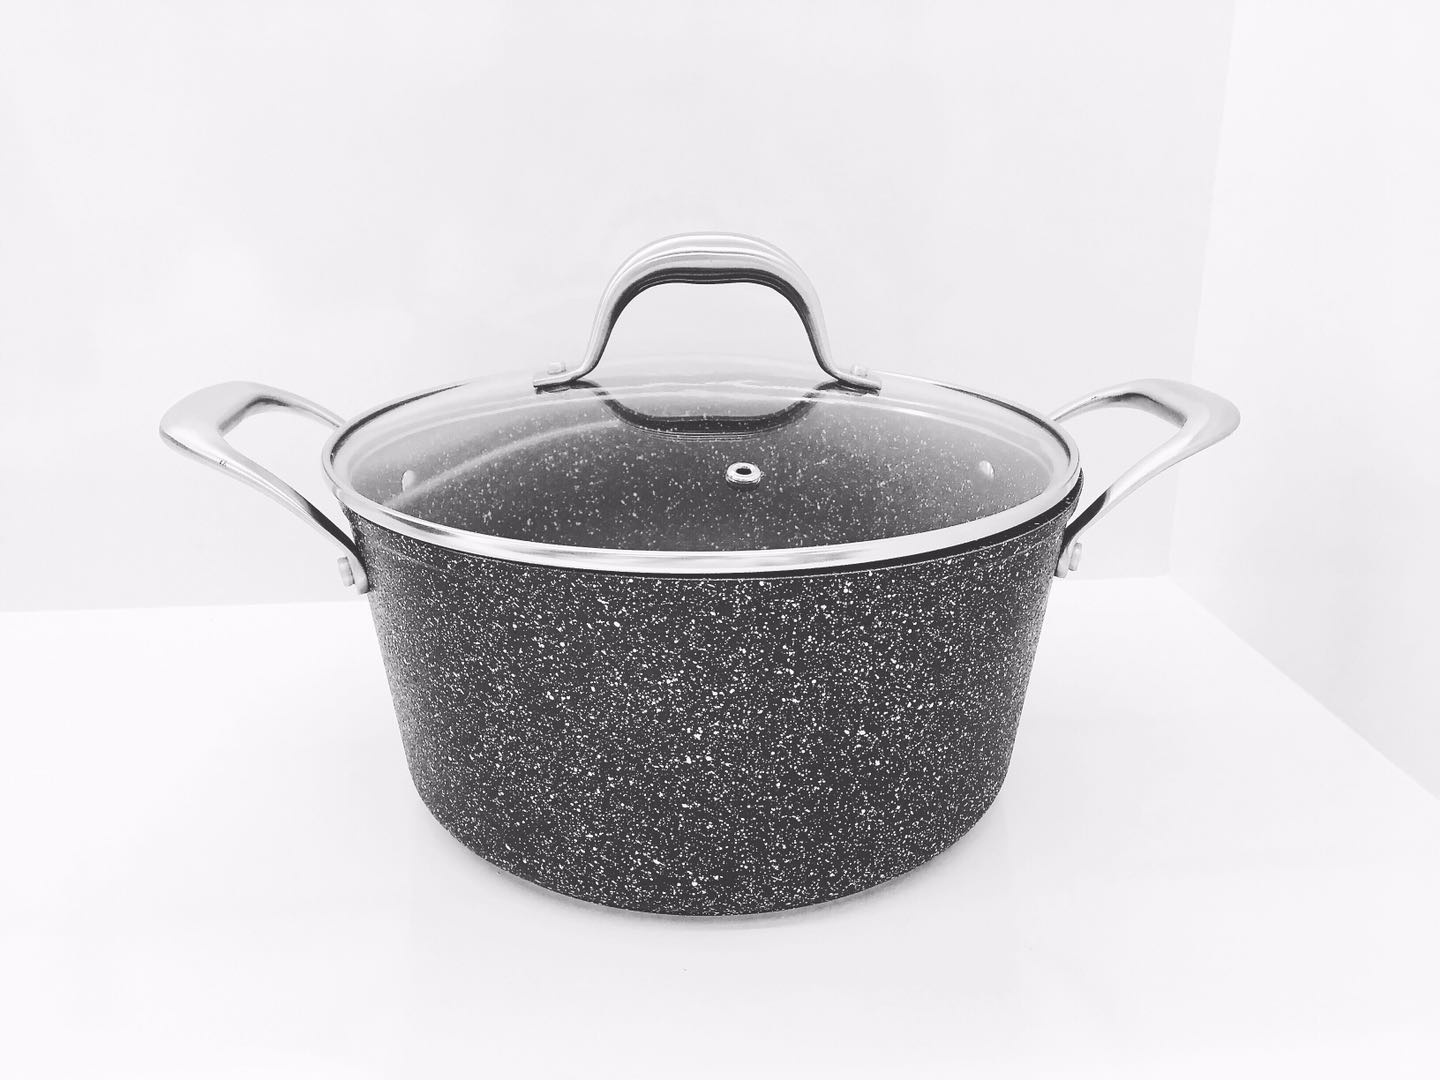 Forged aluminum dutch oven